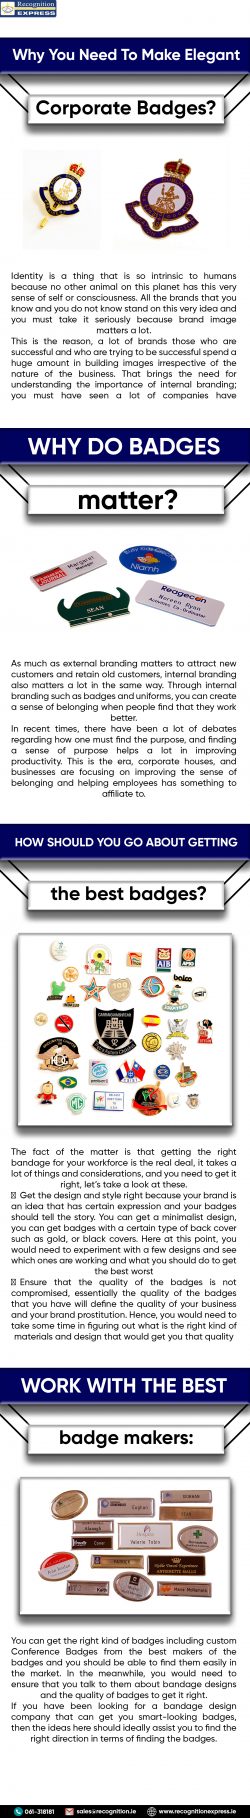 Why You Need To Make Elegant Corporate Badges?